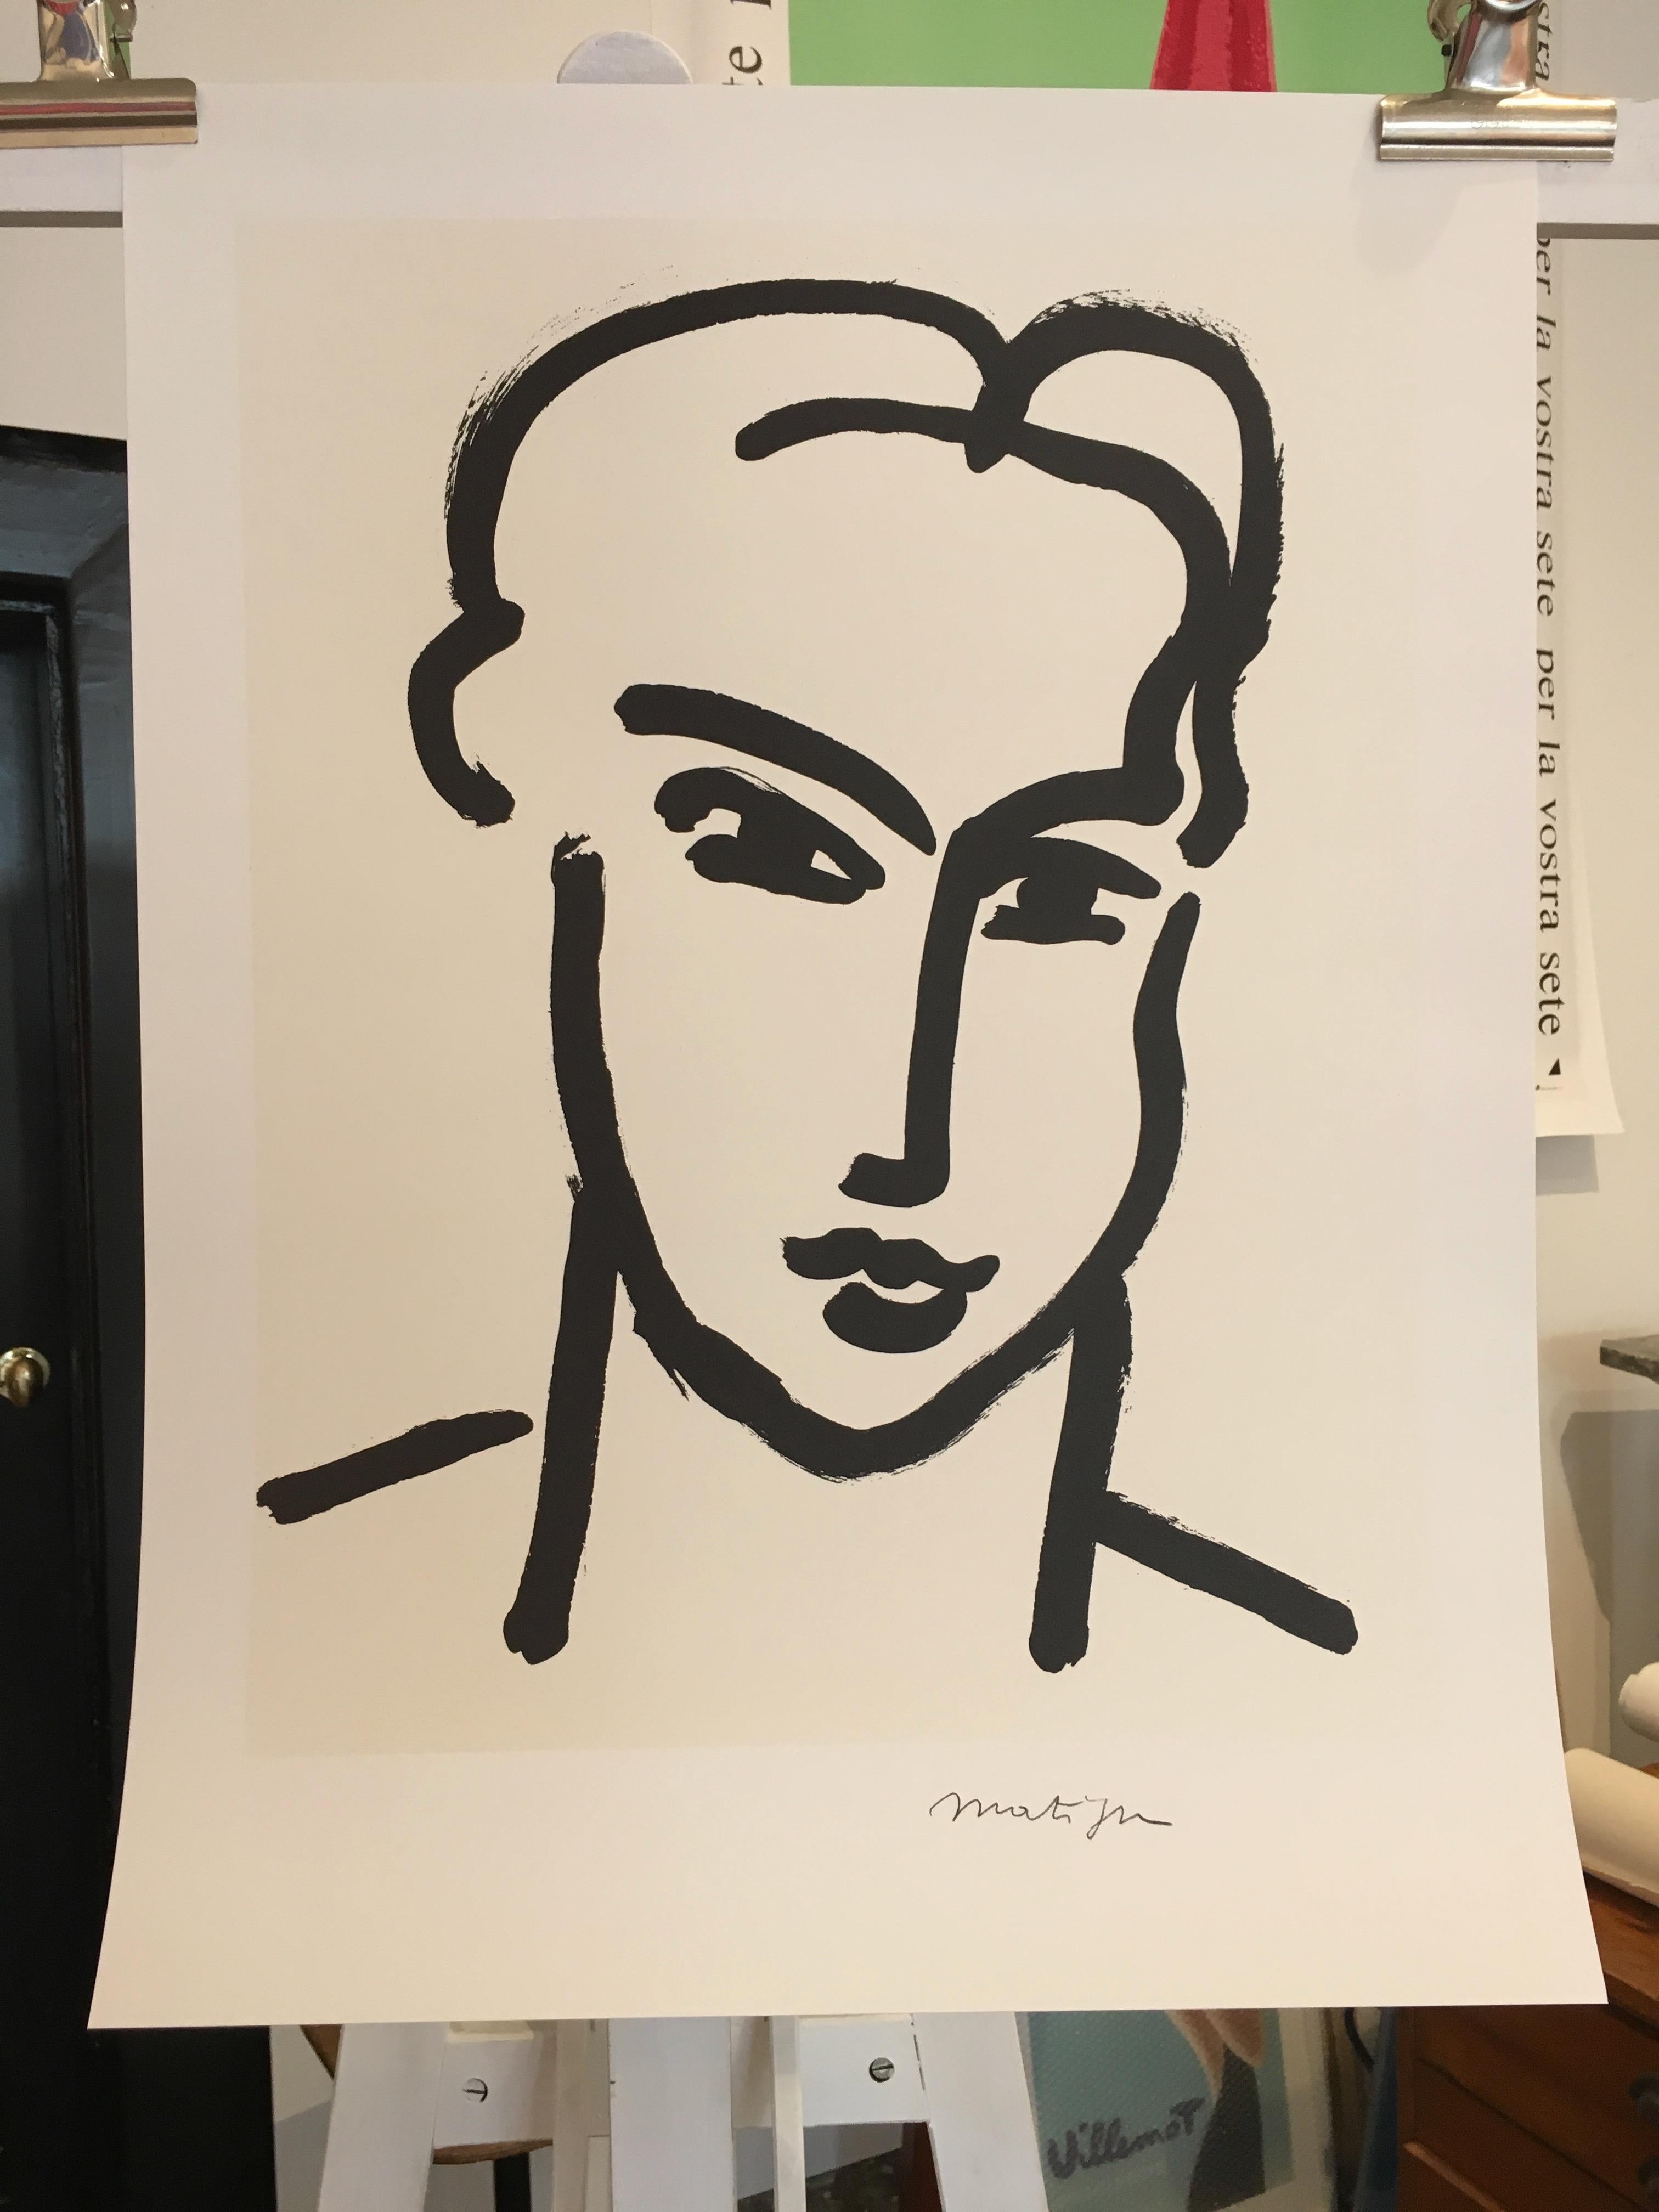 Vintage Art Poster Henri Matisse 'Grande Tete De Katia' 1994 

This is an edition poster produced in 1994, this was beautifully reproduced by Maeght Editeur with the permission of the Henri Matisse Estate. This image is instantly recognisable as